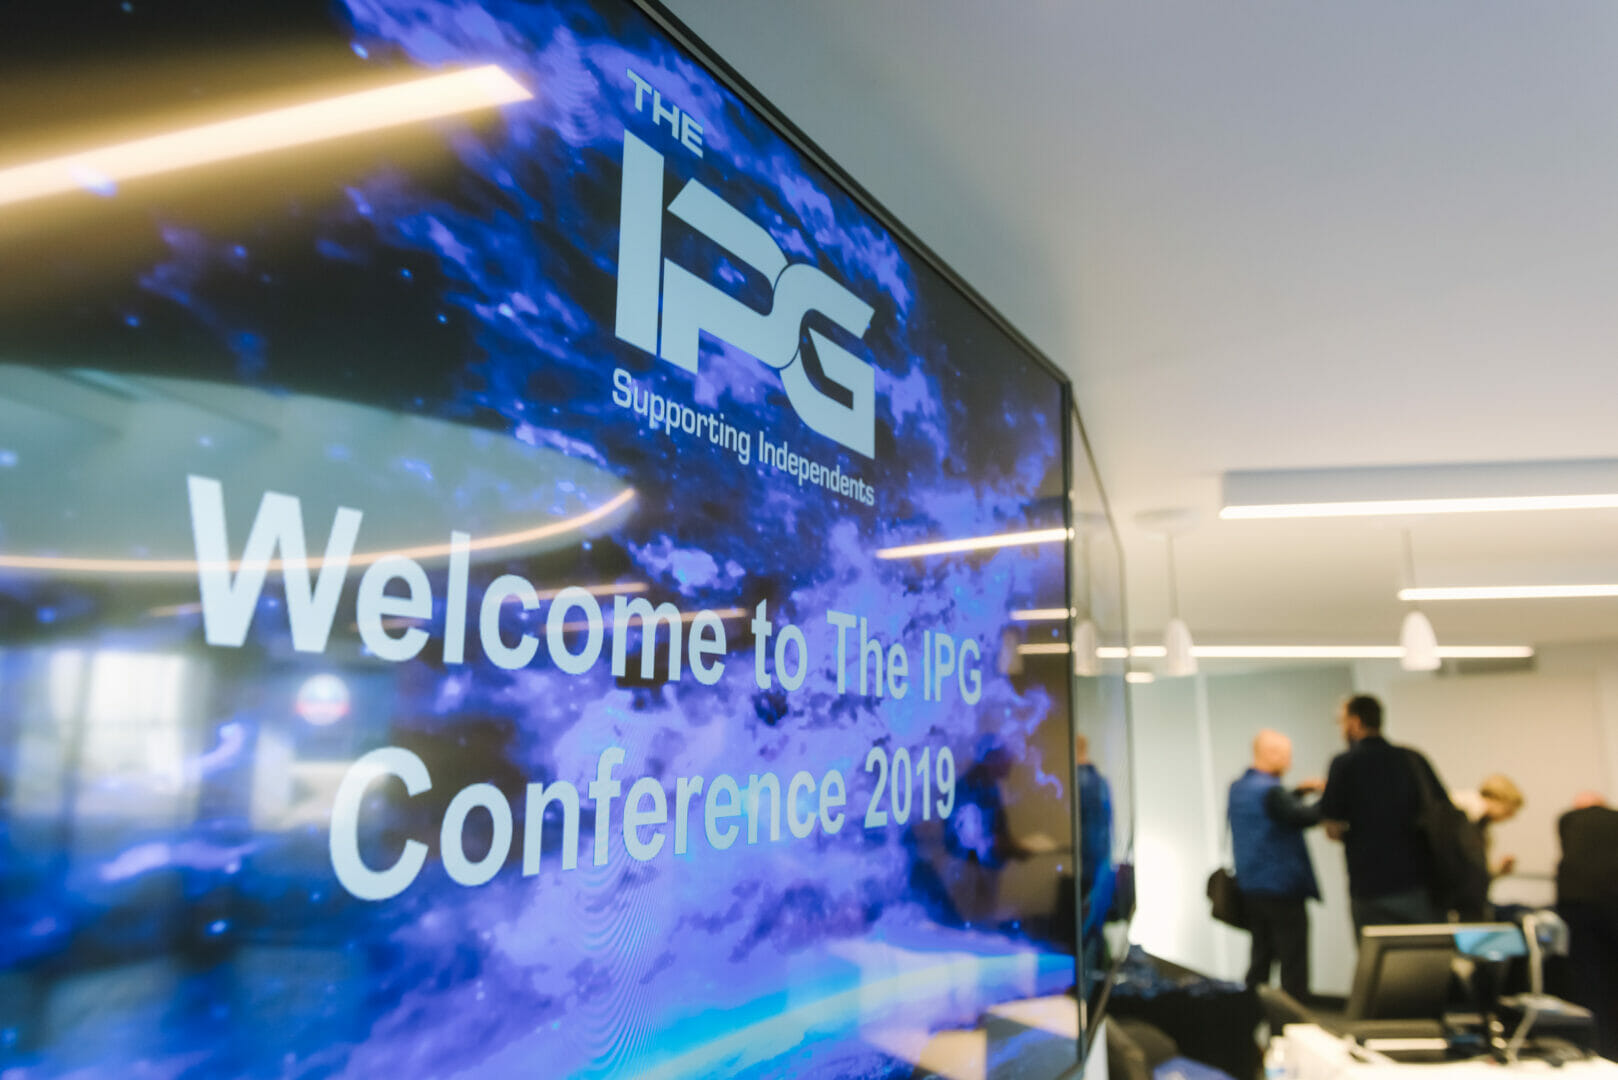 Rocketing success for The IPG as they hold their second biennial conference at The National Space Centre   @ipg_the